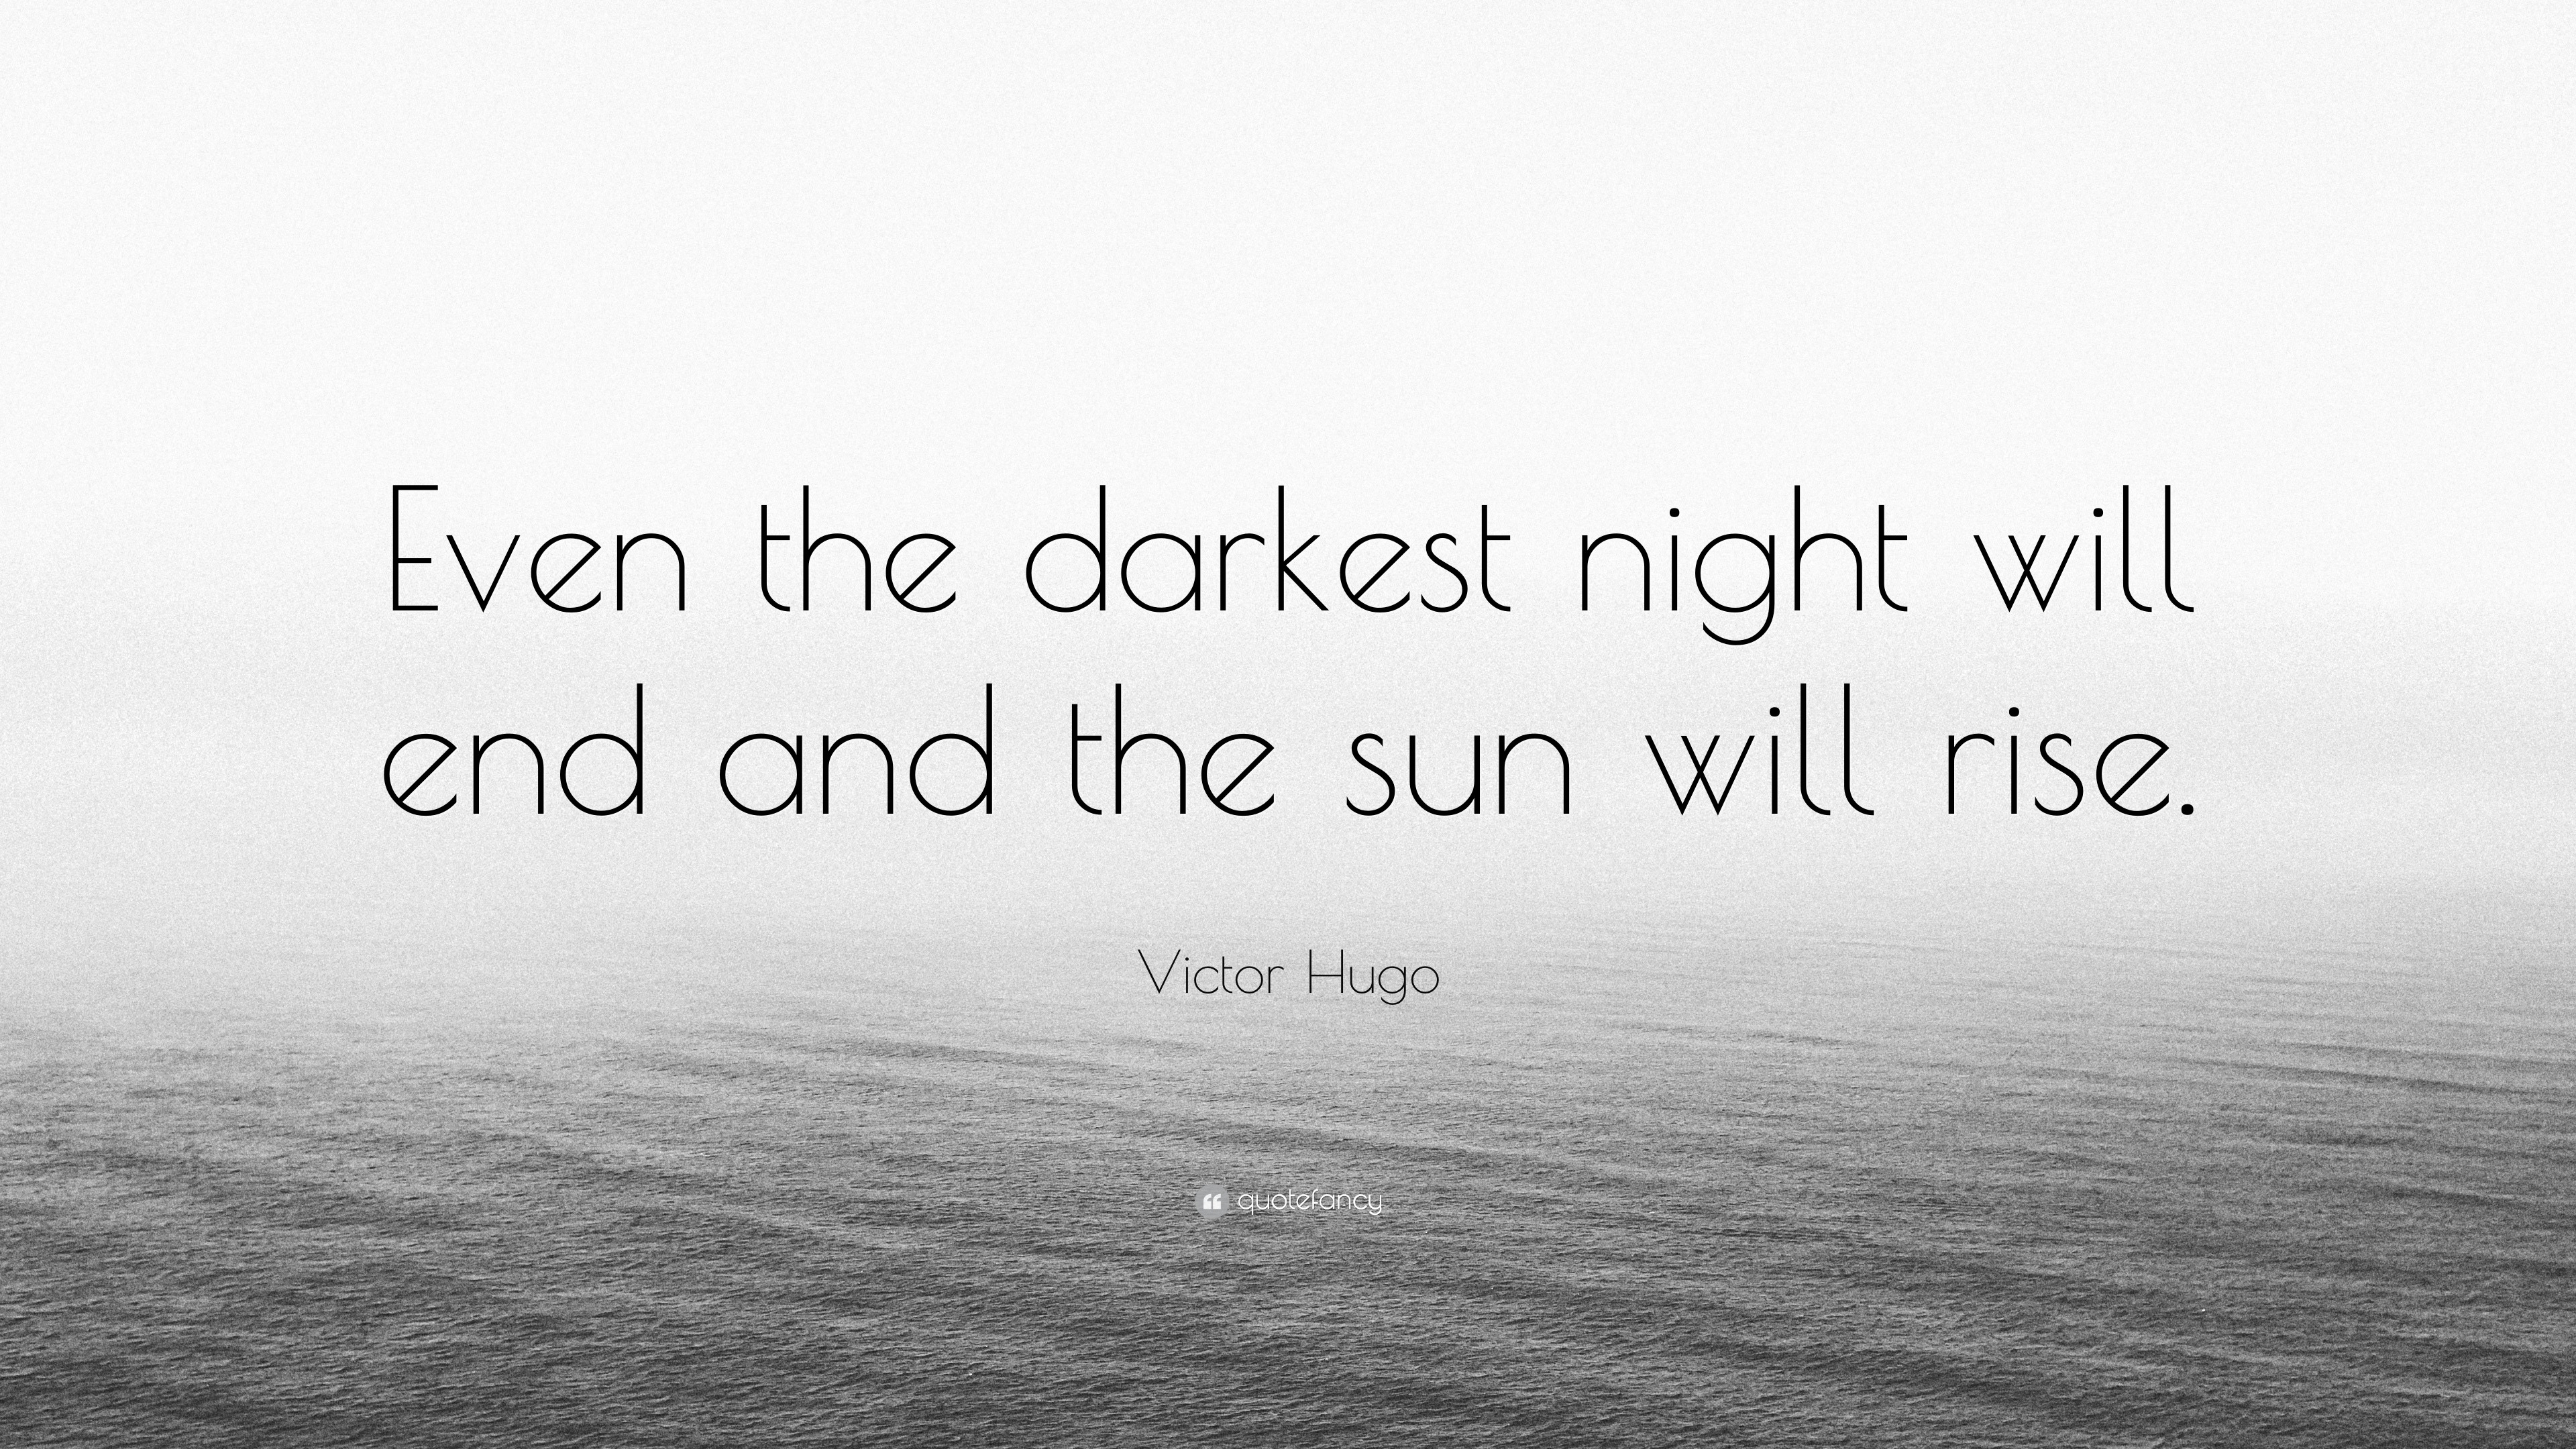 Victor Hugo Quote: “Even the darkest night will end and the sun will rise.”